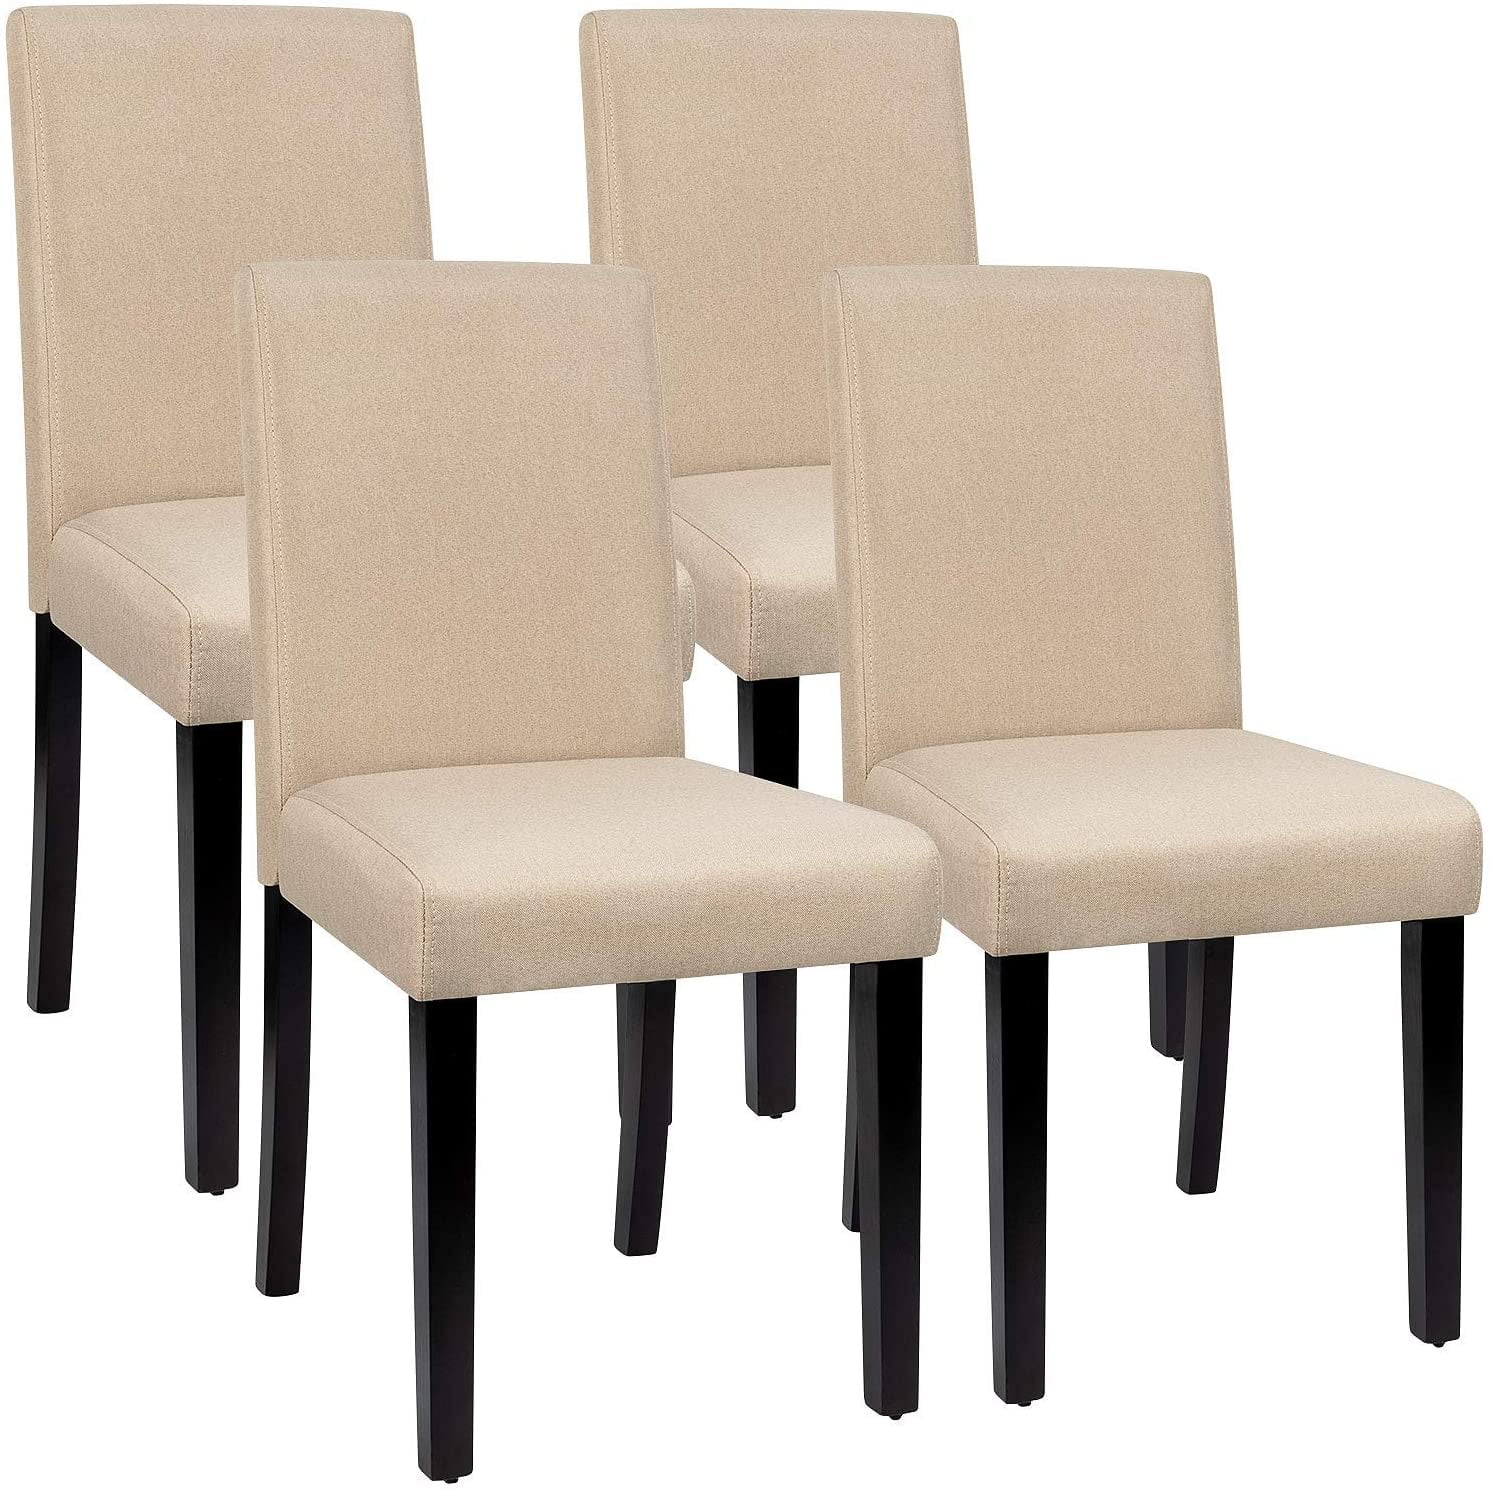 Vineego Set Of 4 Fabric Dining Chairs, Padded Dining Room Chairs With Wheels